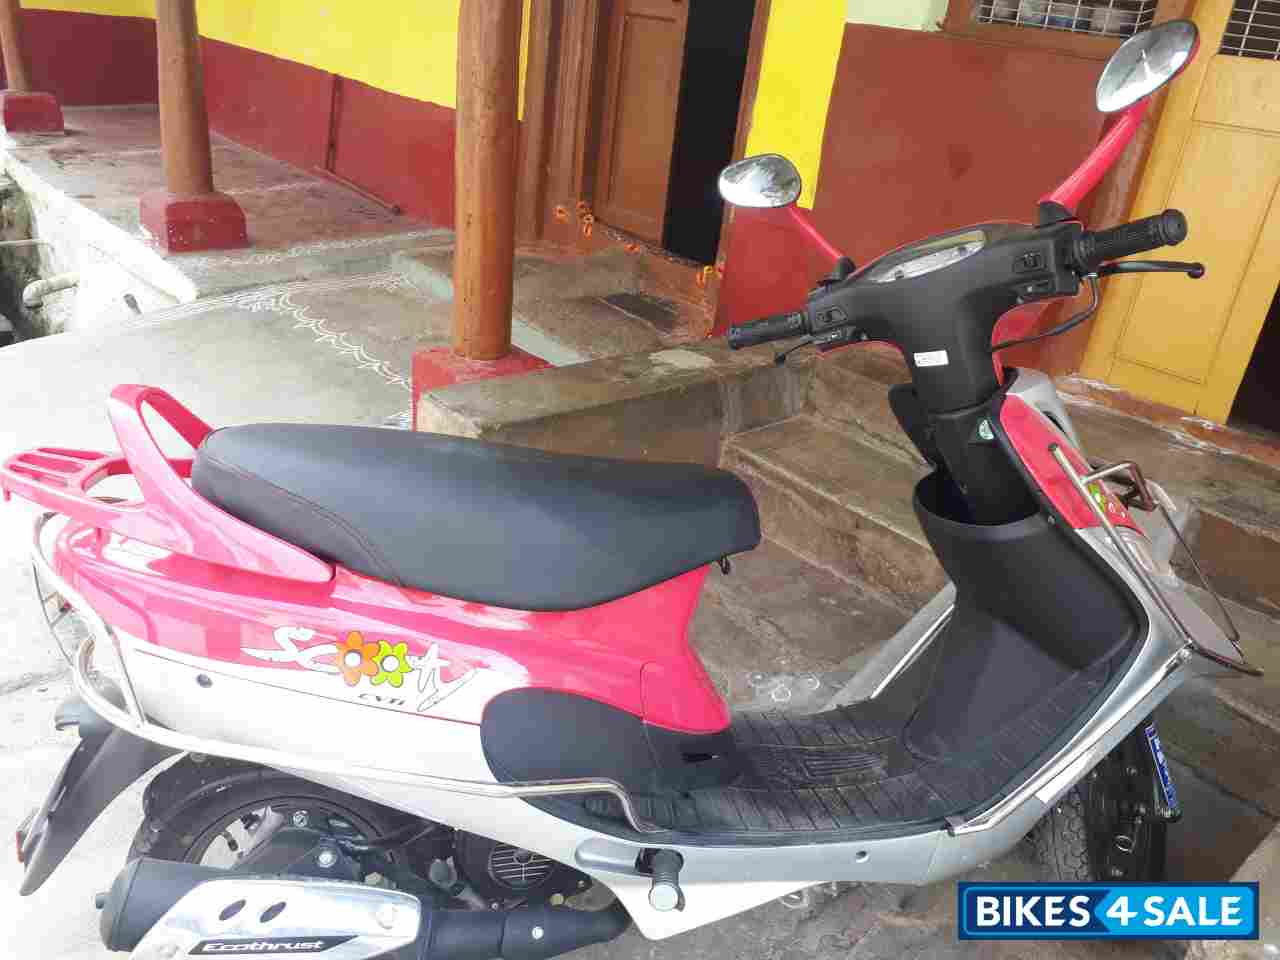 second hand scooty in low price